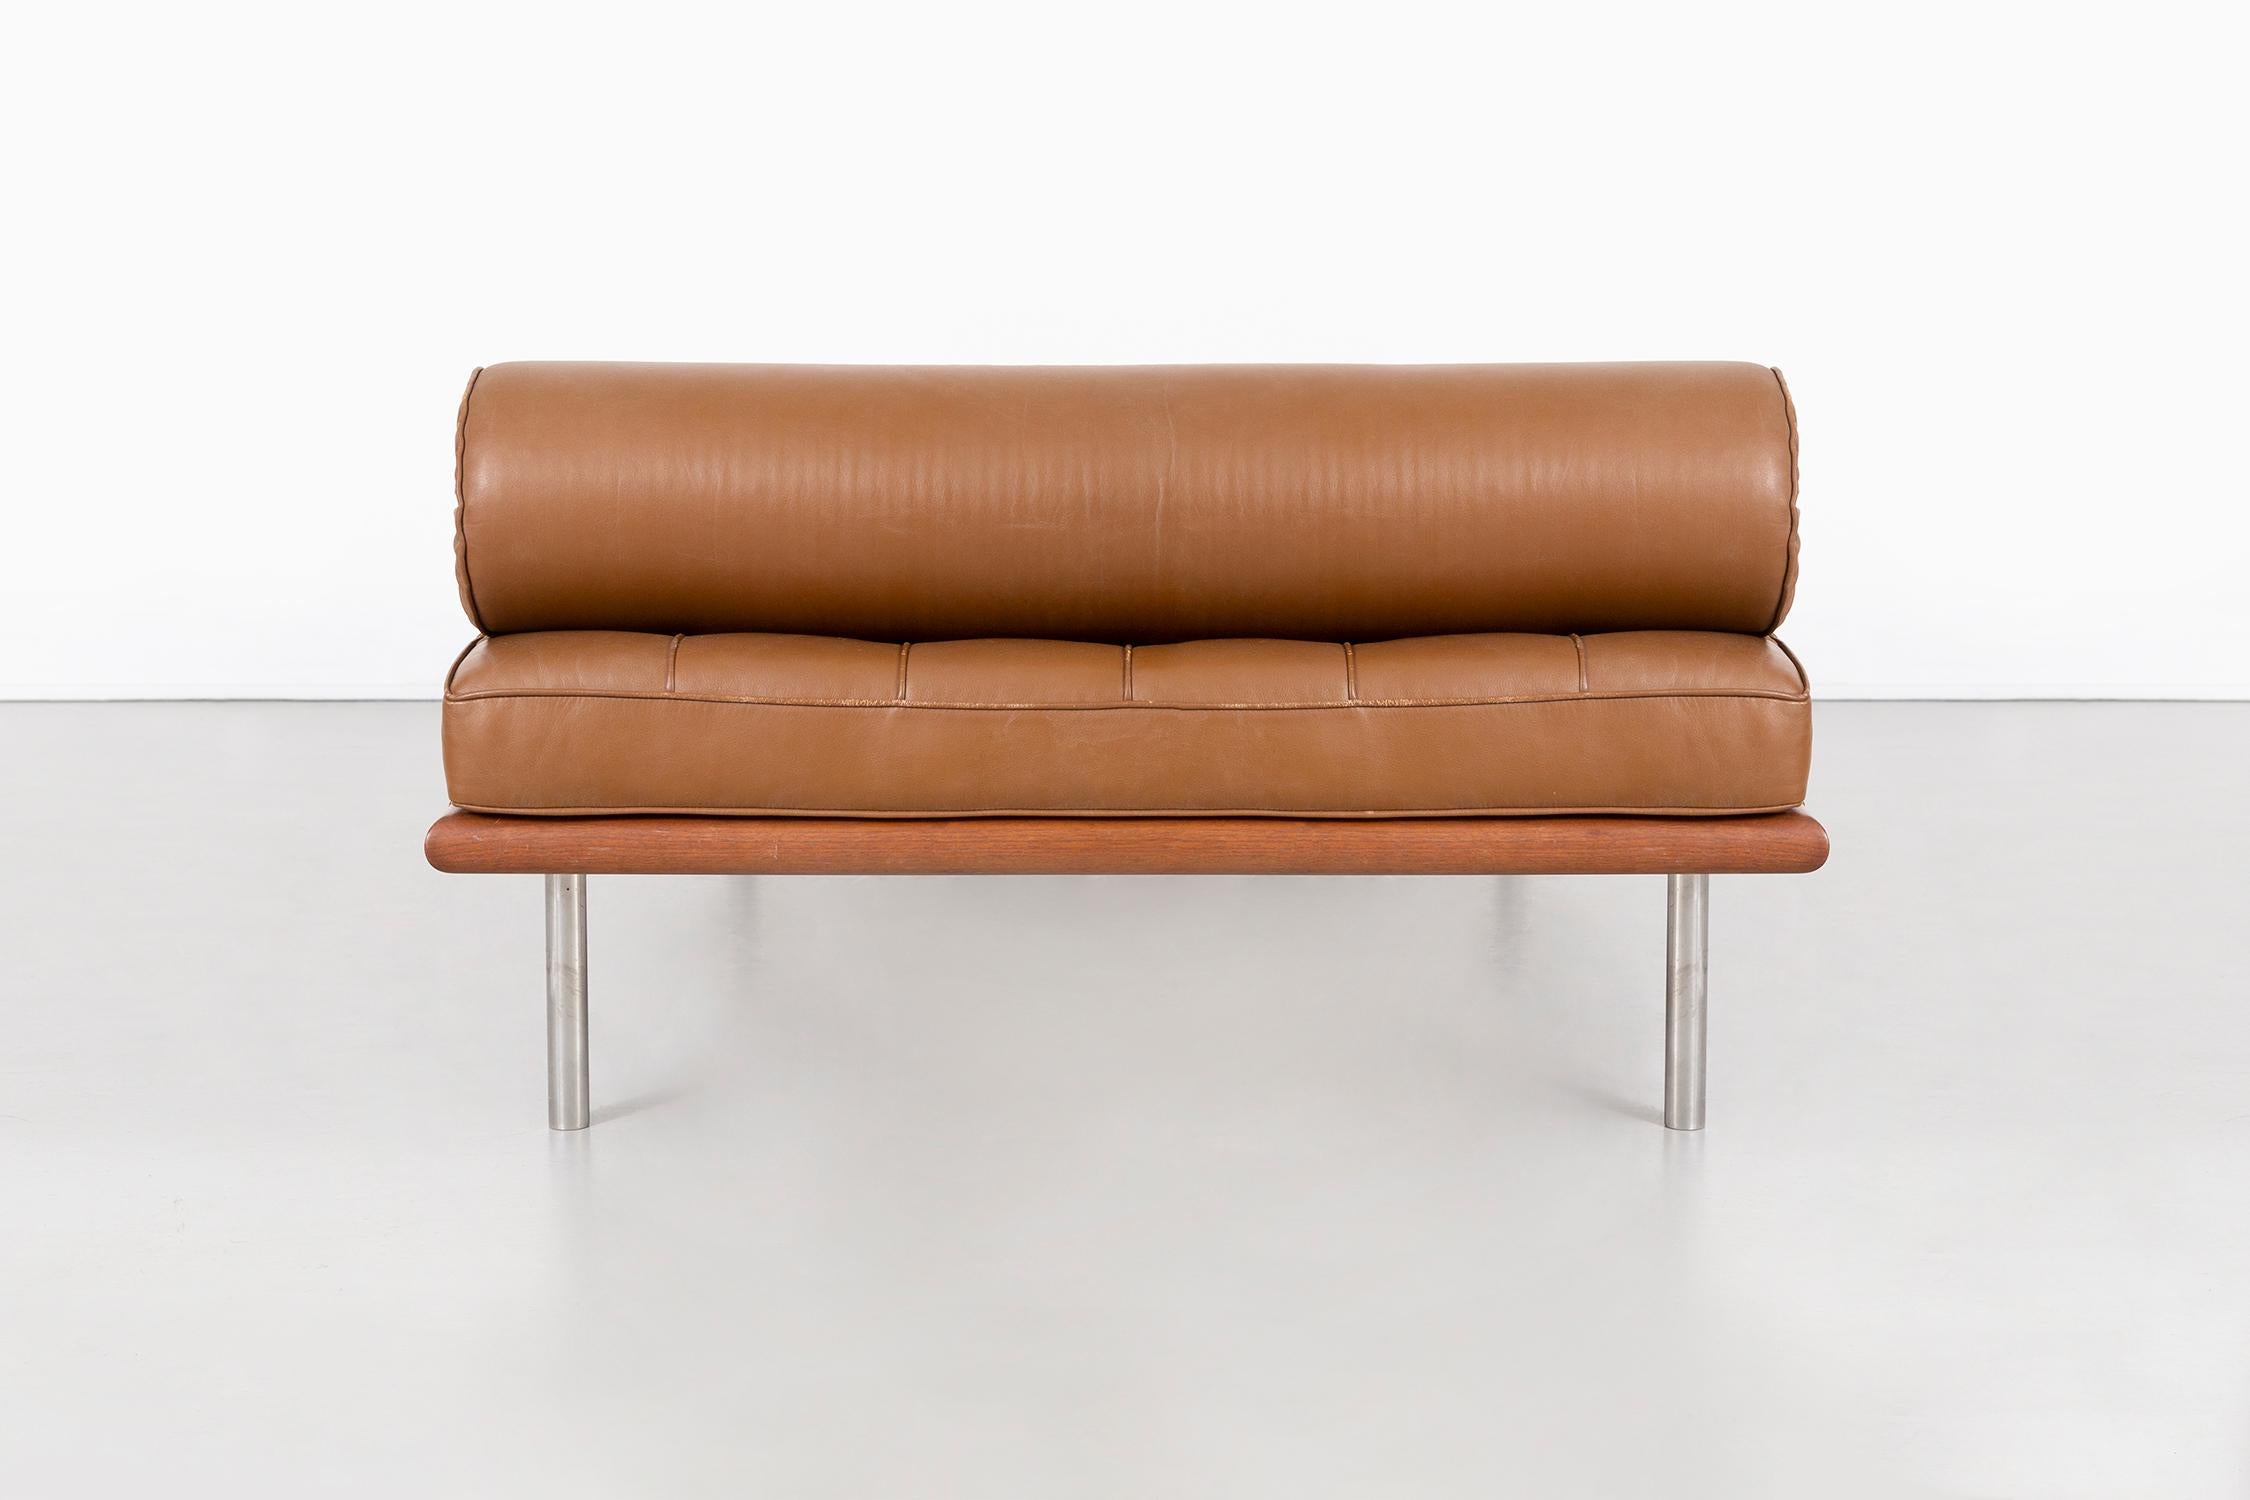 Late 20th Century Mies Van Der Rohe Barcelona Couch for Knoll